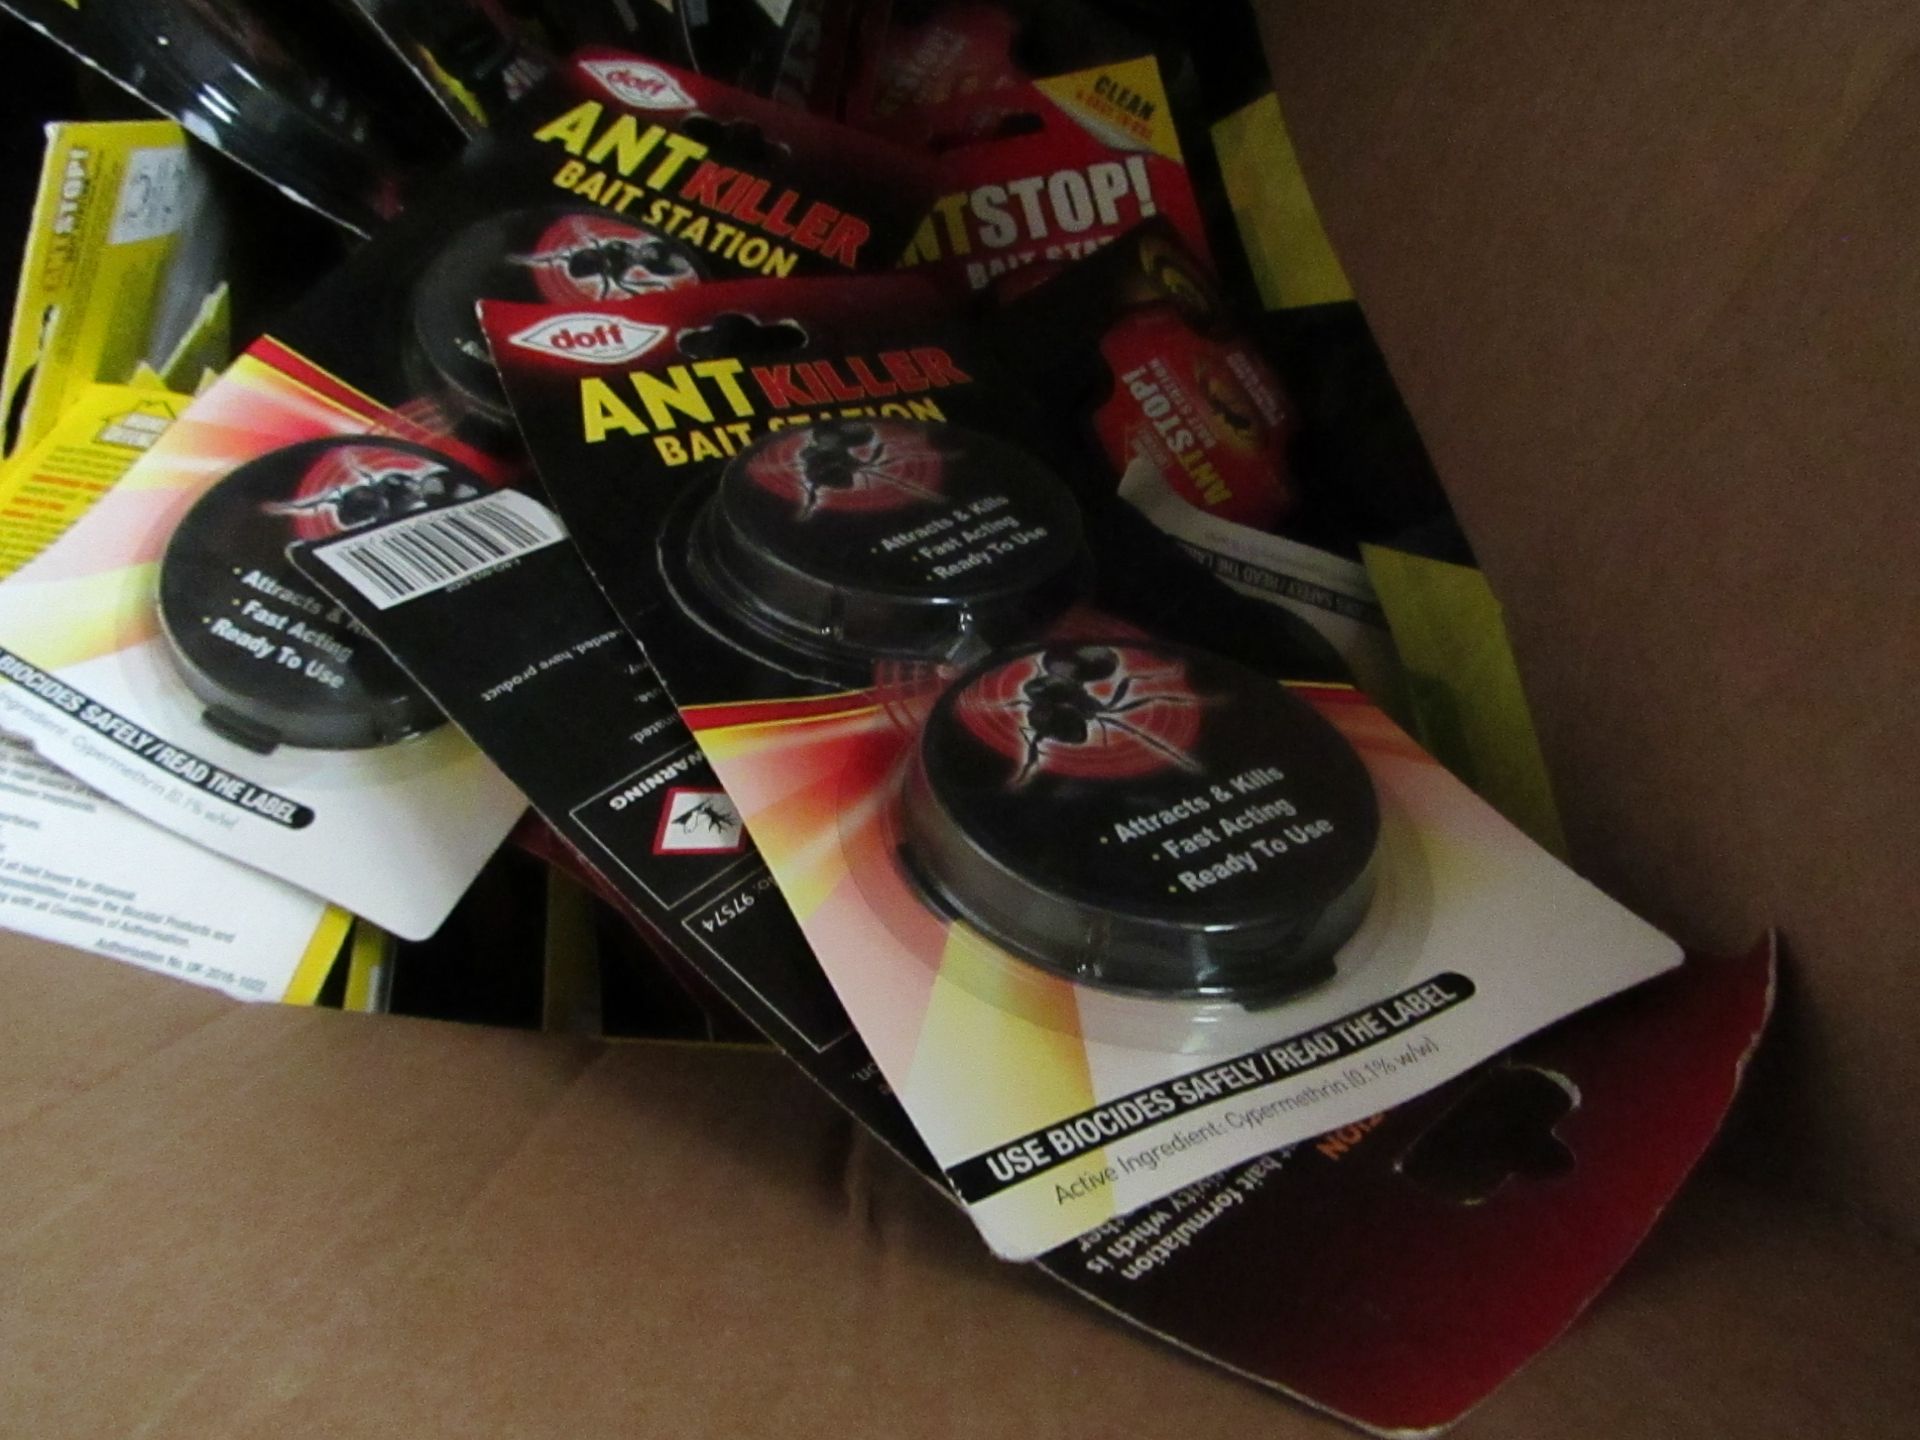 10x Doff Ant killer bait station, new and packaged.